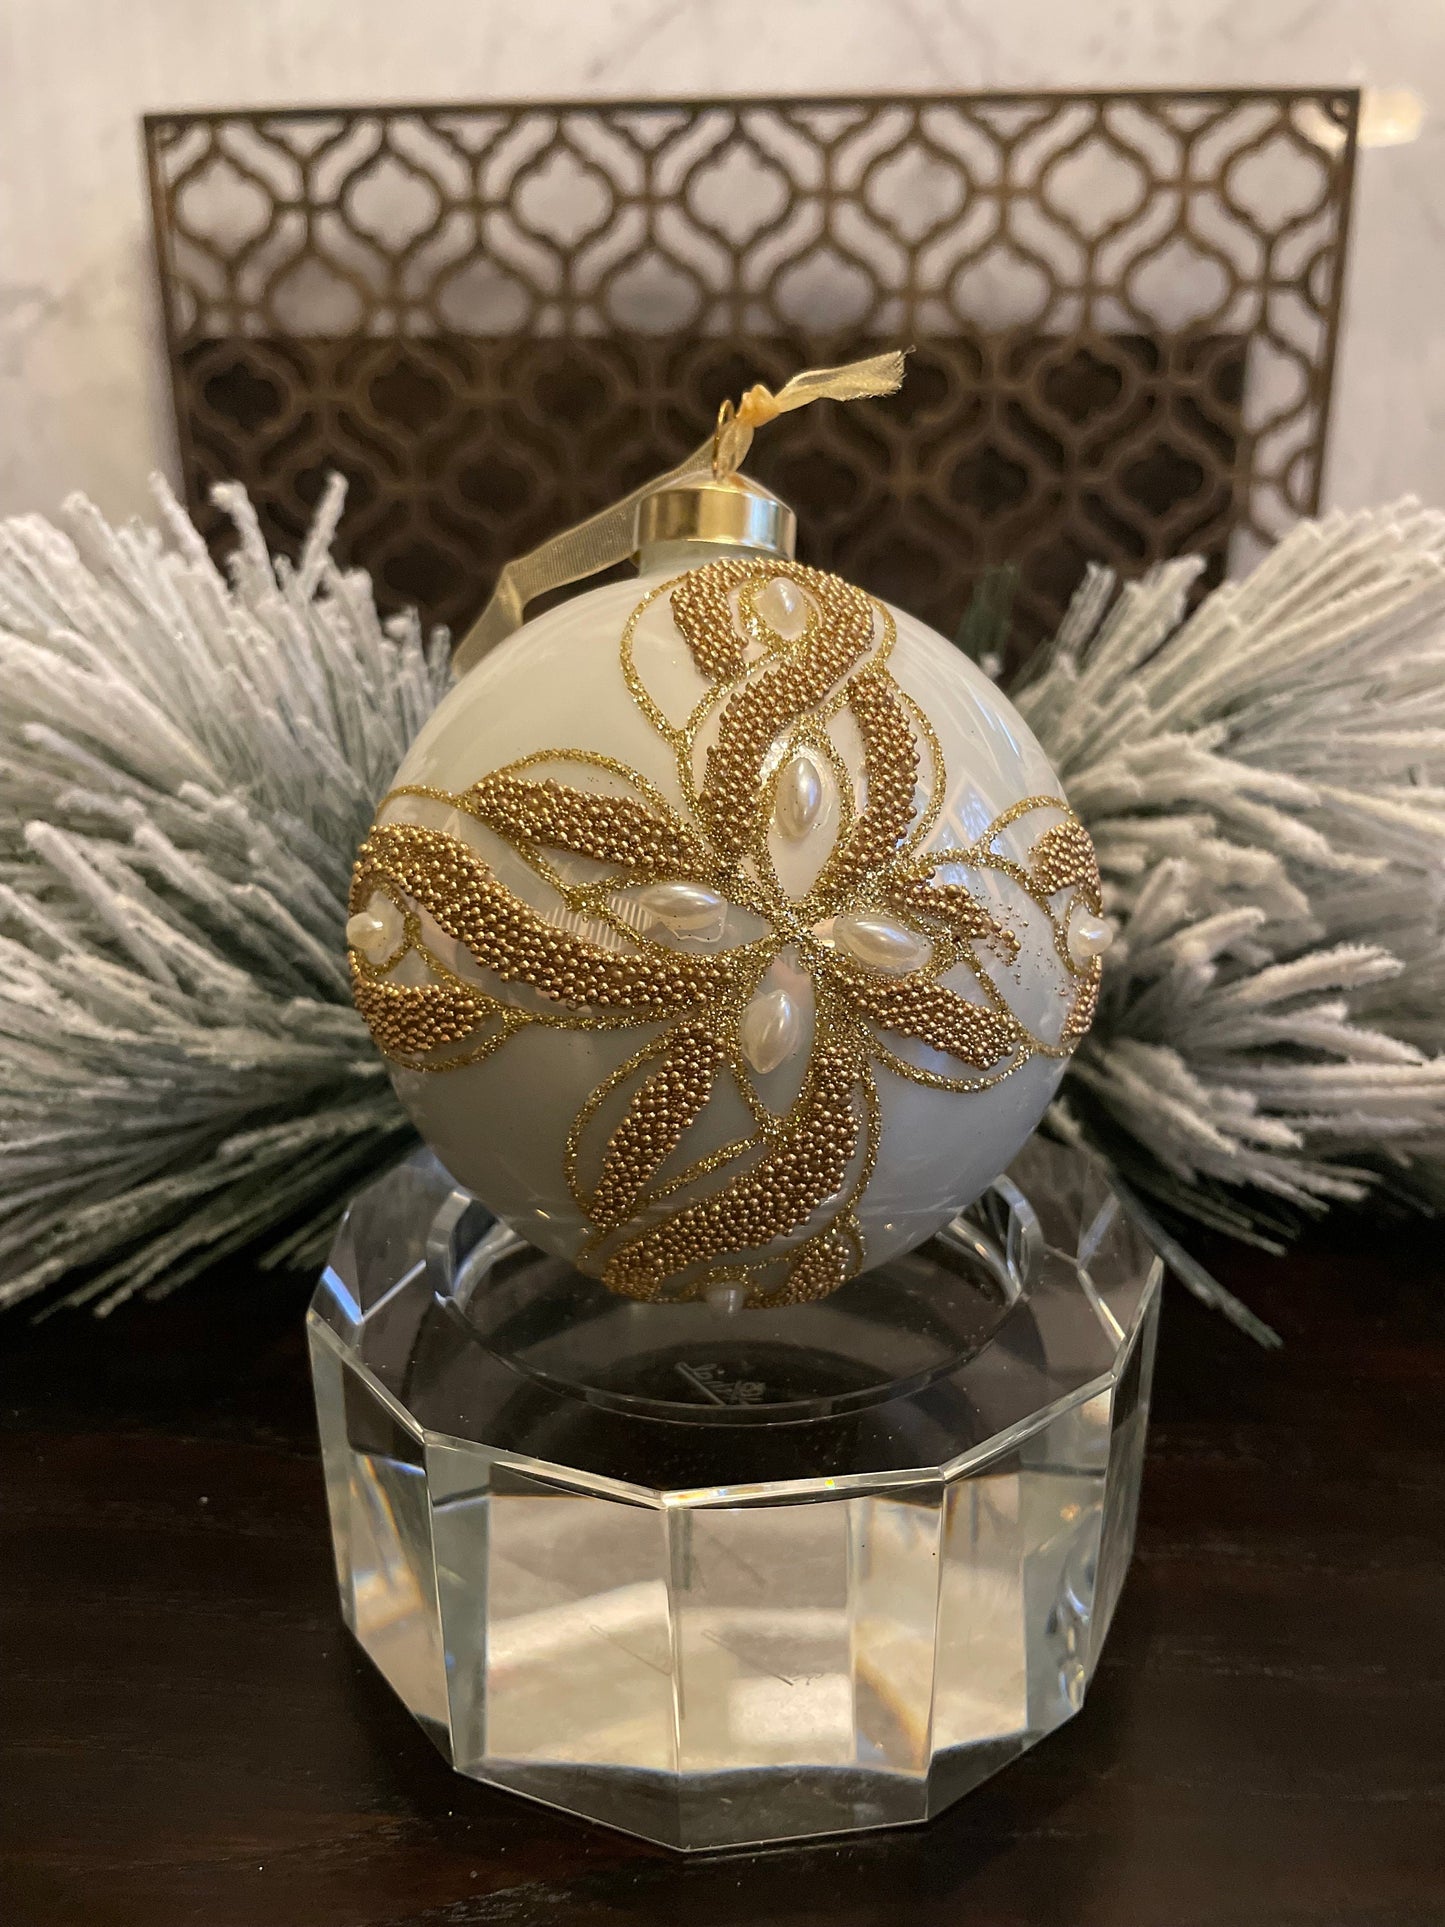 Set of 2. 4" glass ivory and gold embellished with pearls ornament ball.